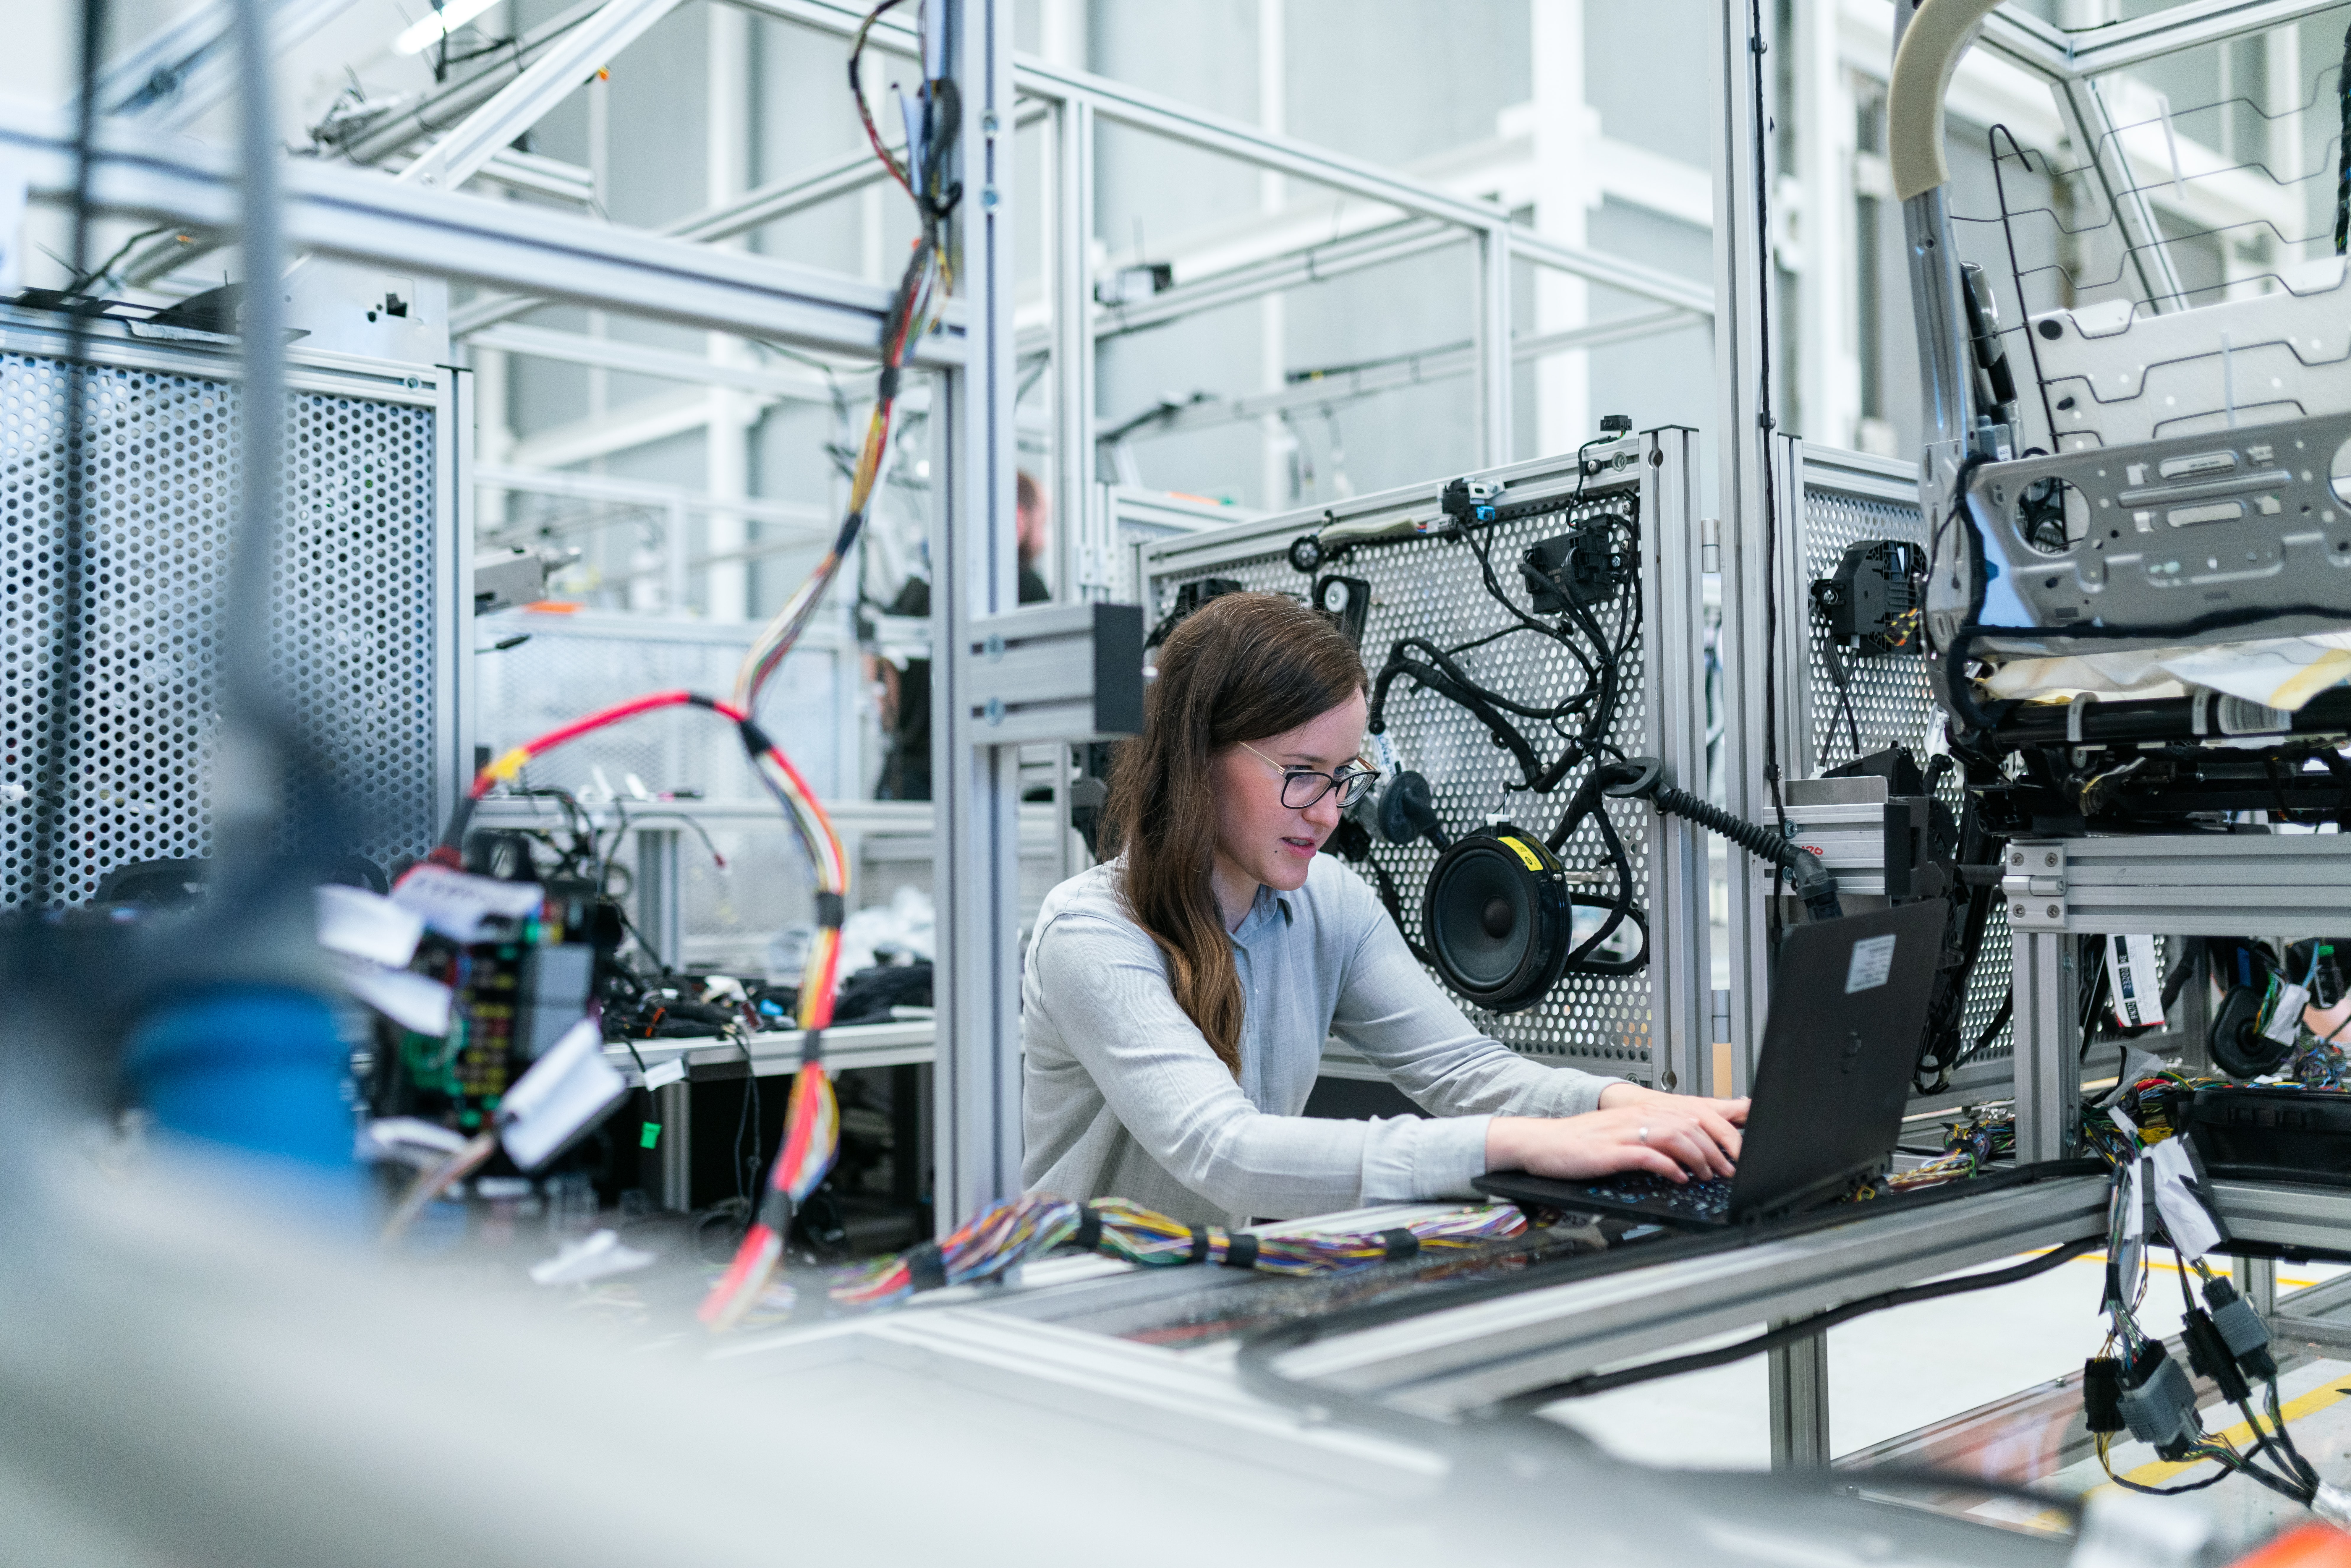 Preparing students for Industry 4.0